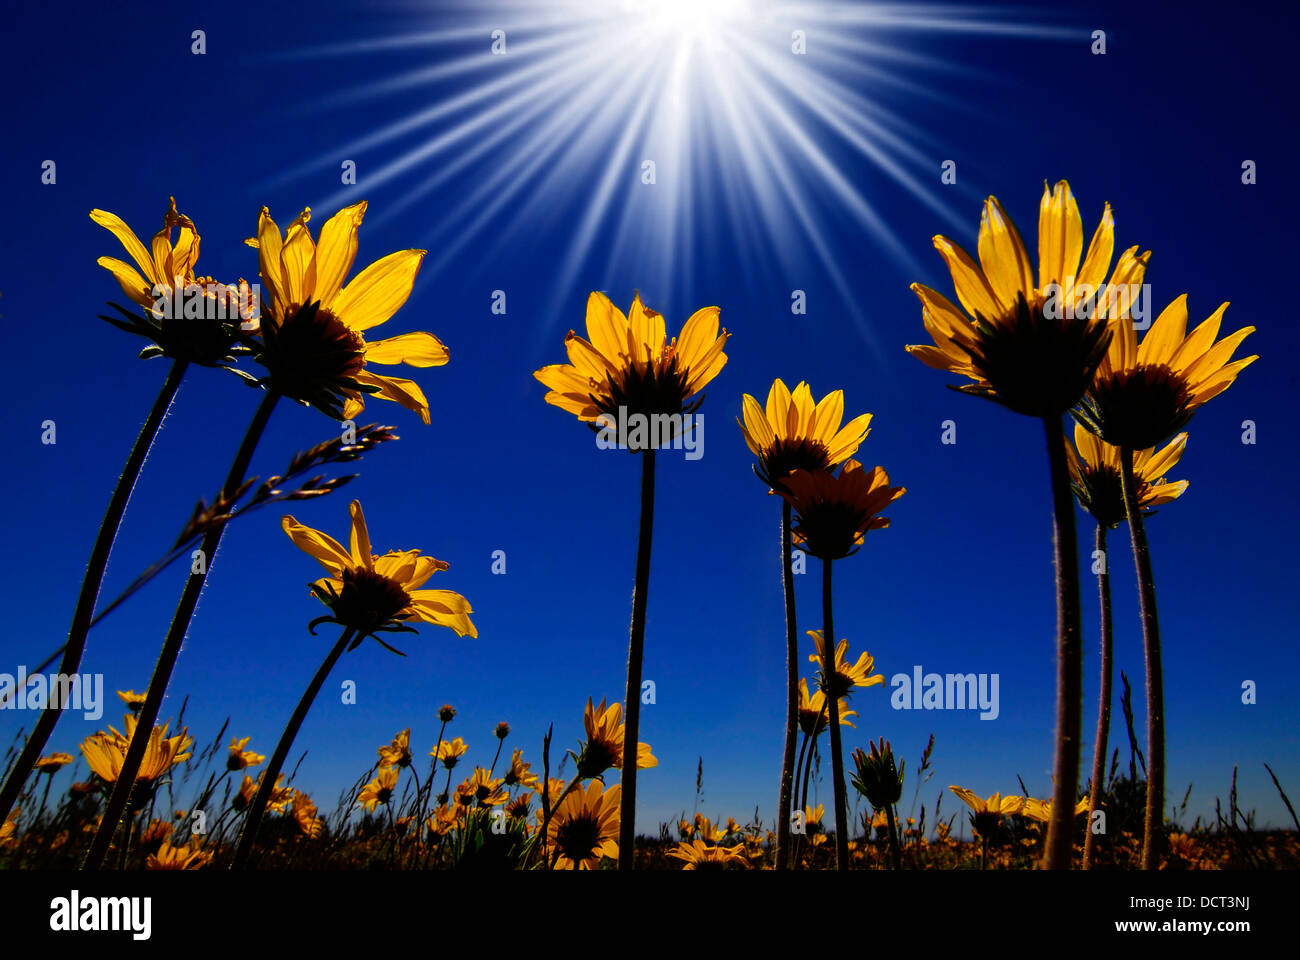 Summer yellow flowers growing up towards sun in blue sky Stock Photo